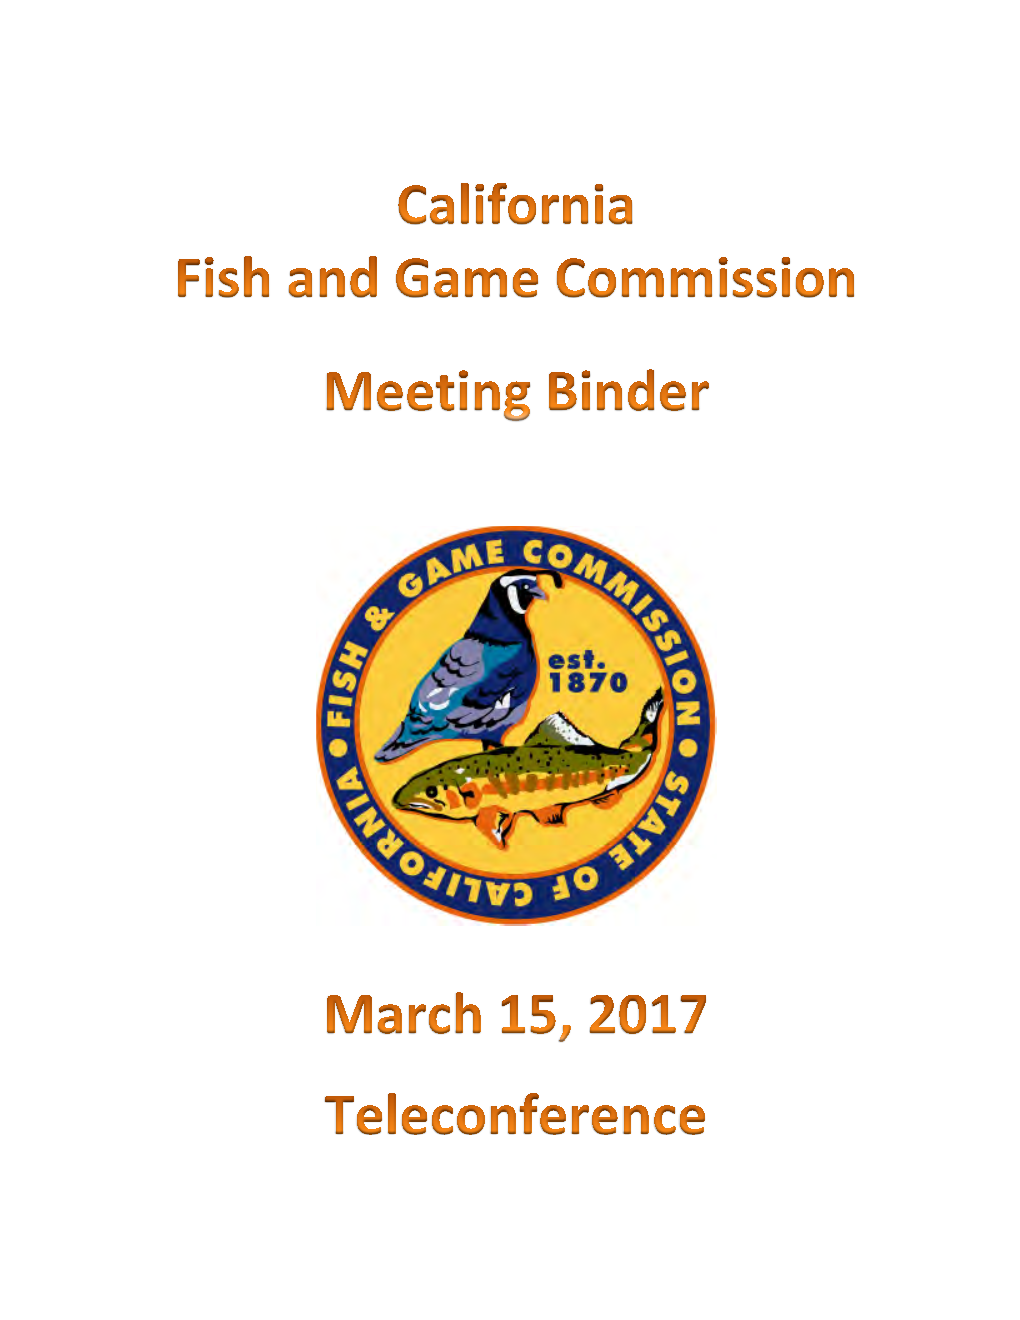 California Fish and Game Commission (Commission) in Partnership with the California Department of Fish and Wildlife (Department)